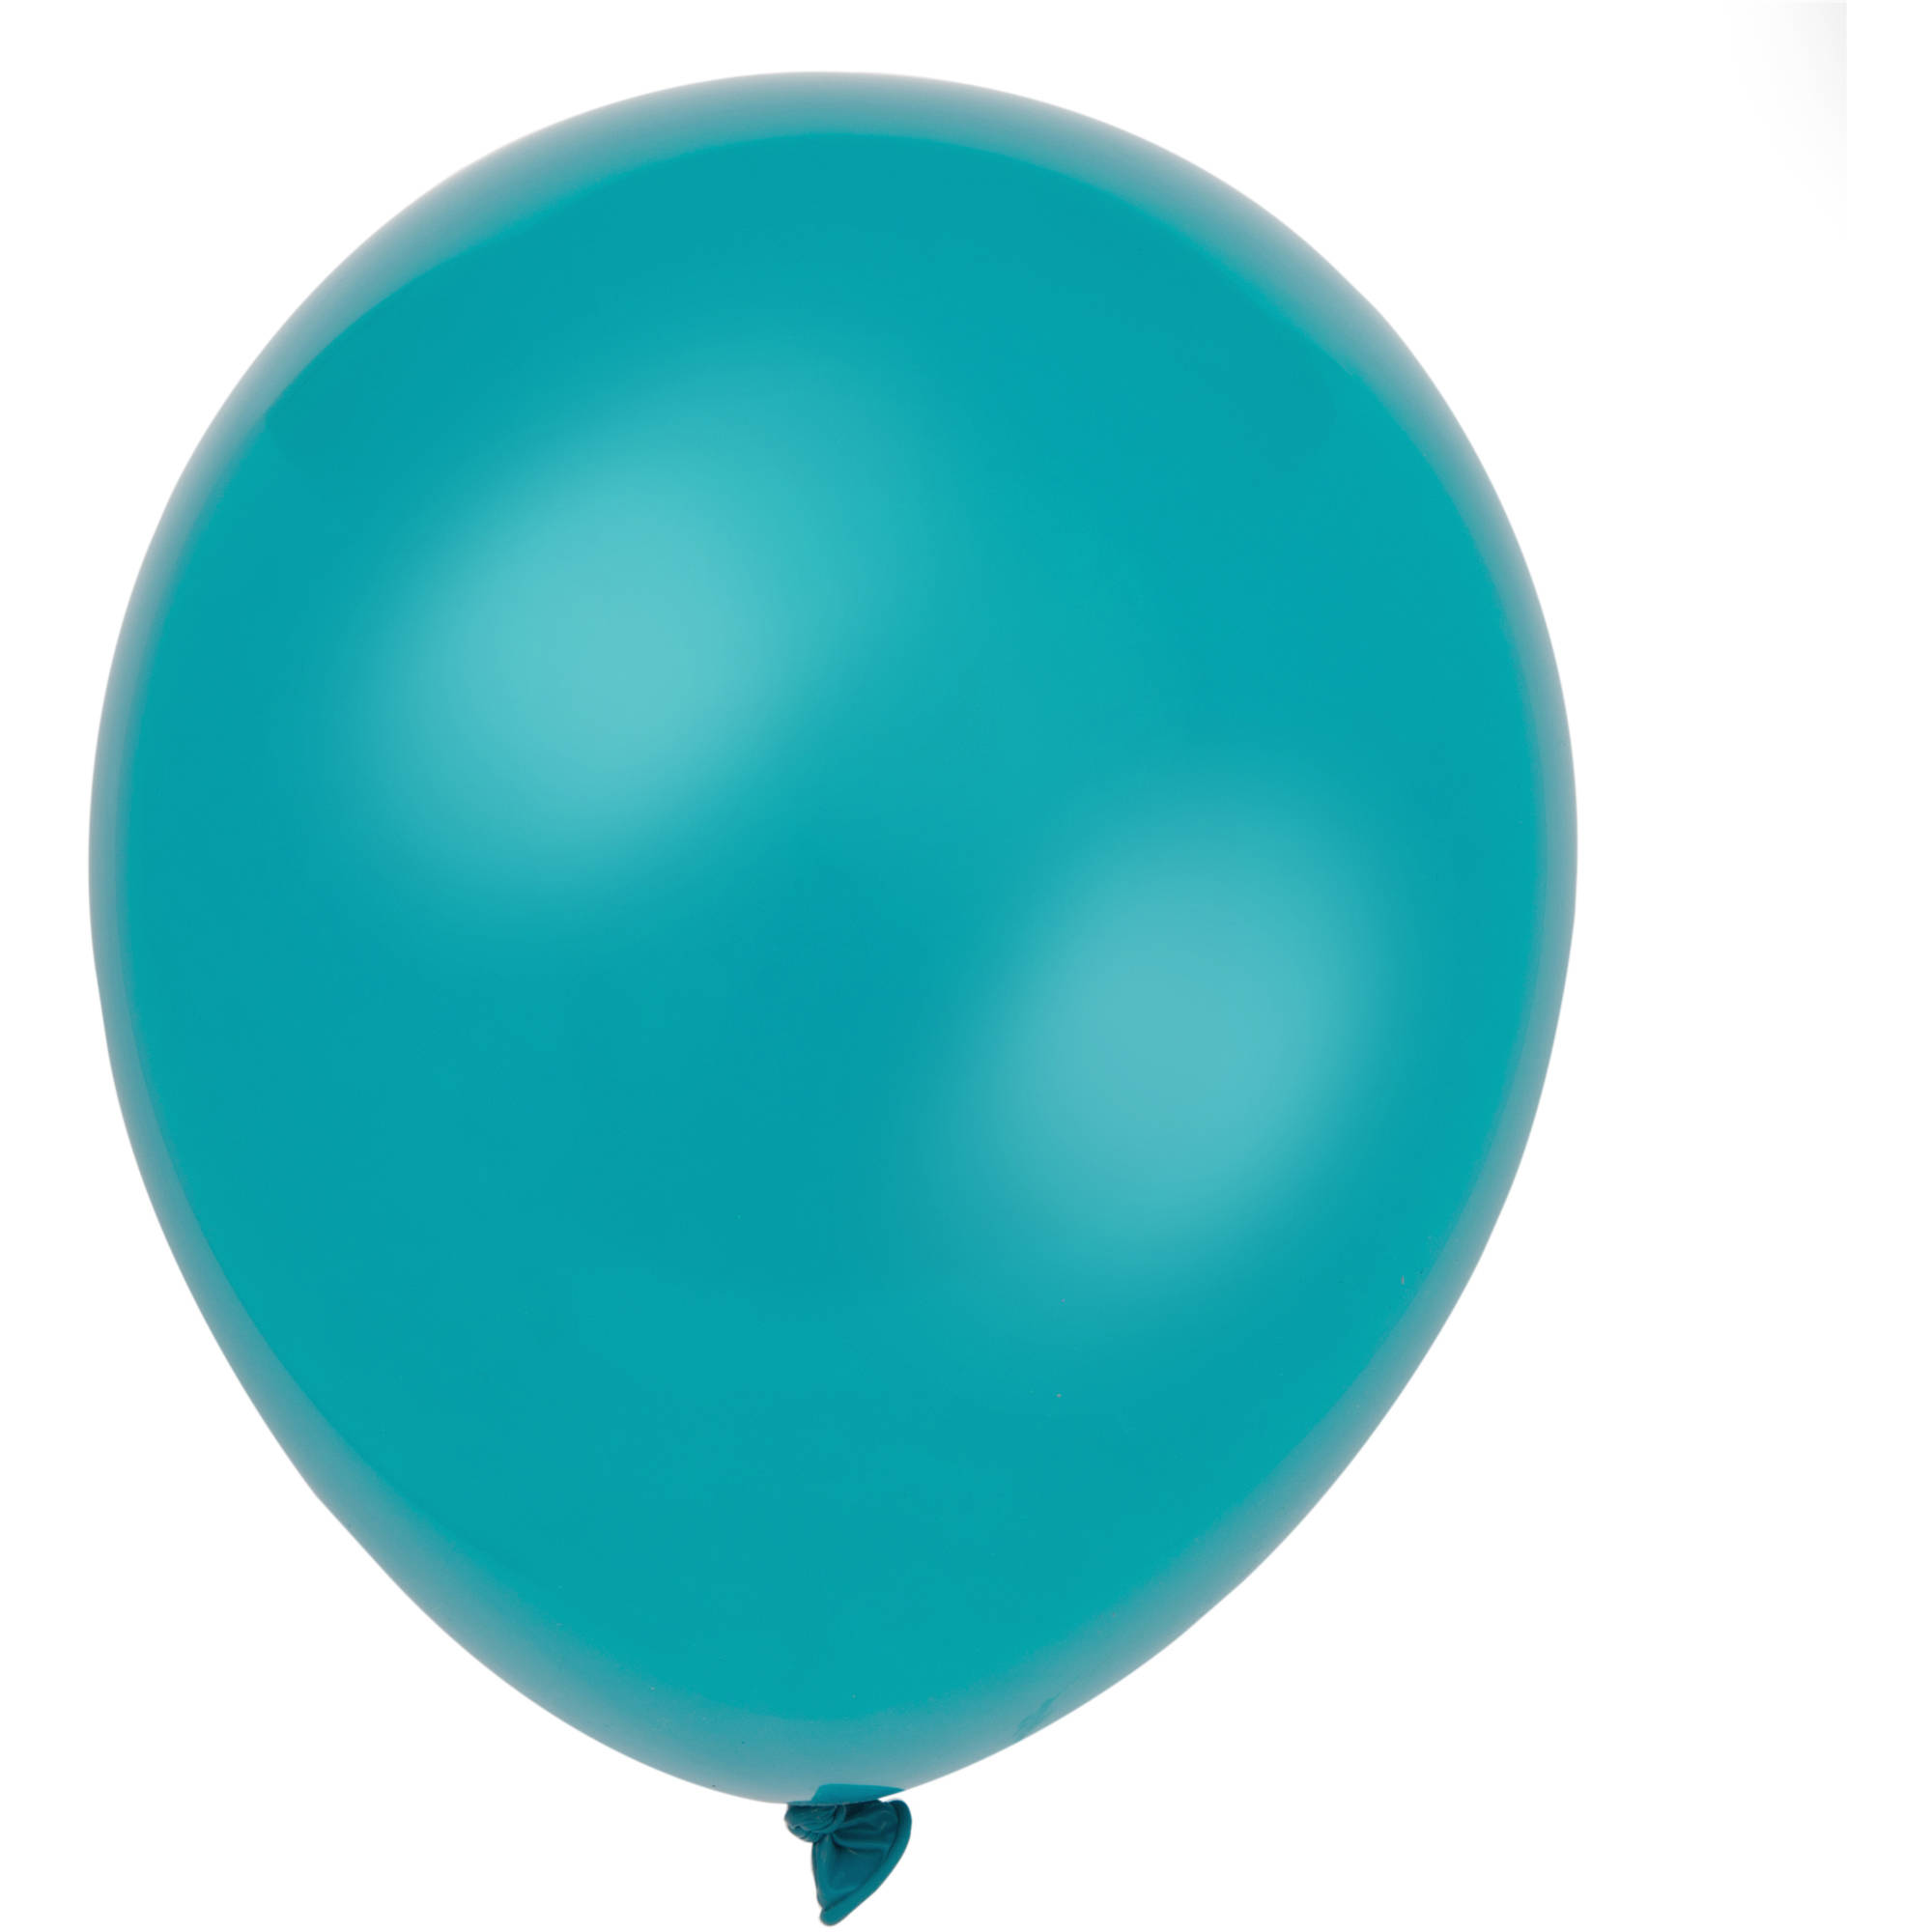 Unique Industries Latex 12" Teal Solid Print Birthday Balloons, 10 Count - image 1 of 2